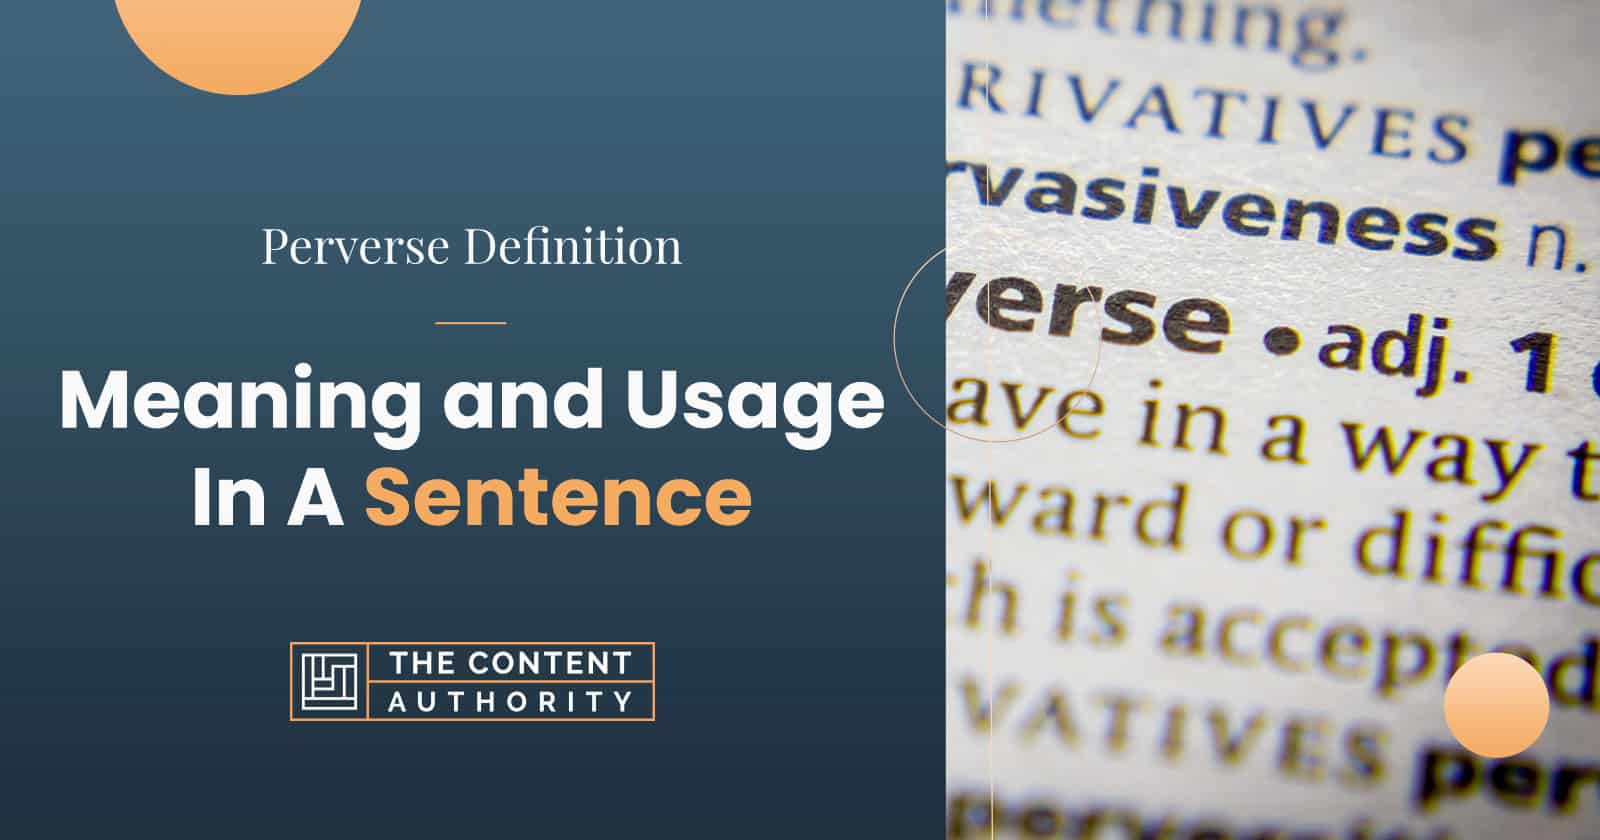 Perverse Definition – Meaning and Usage In A Sentence